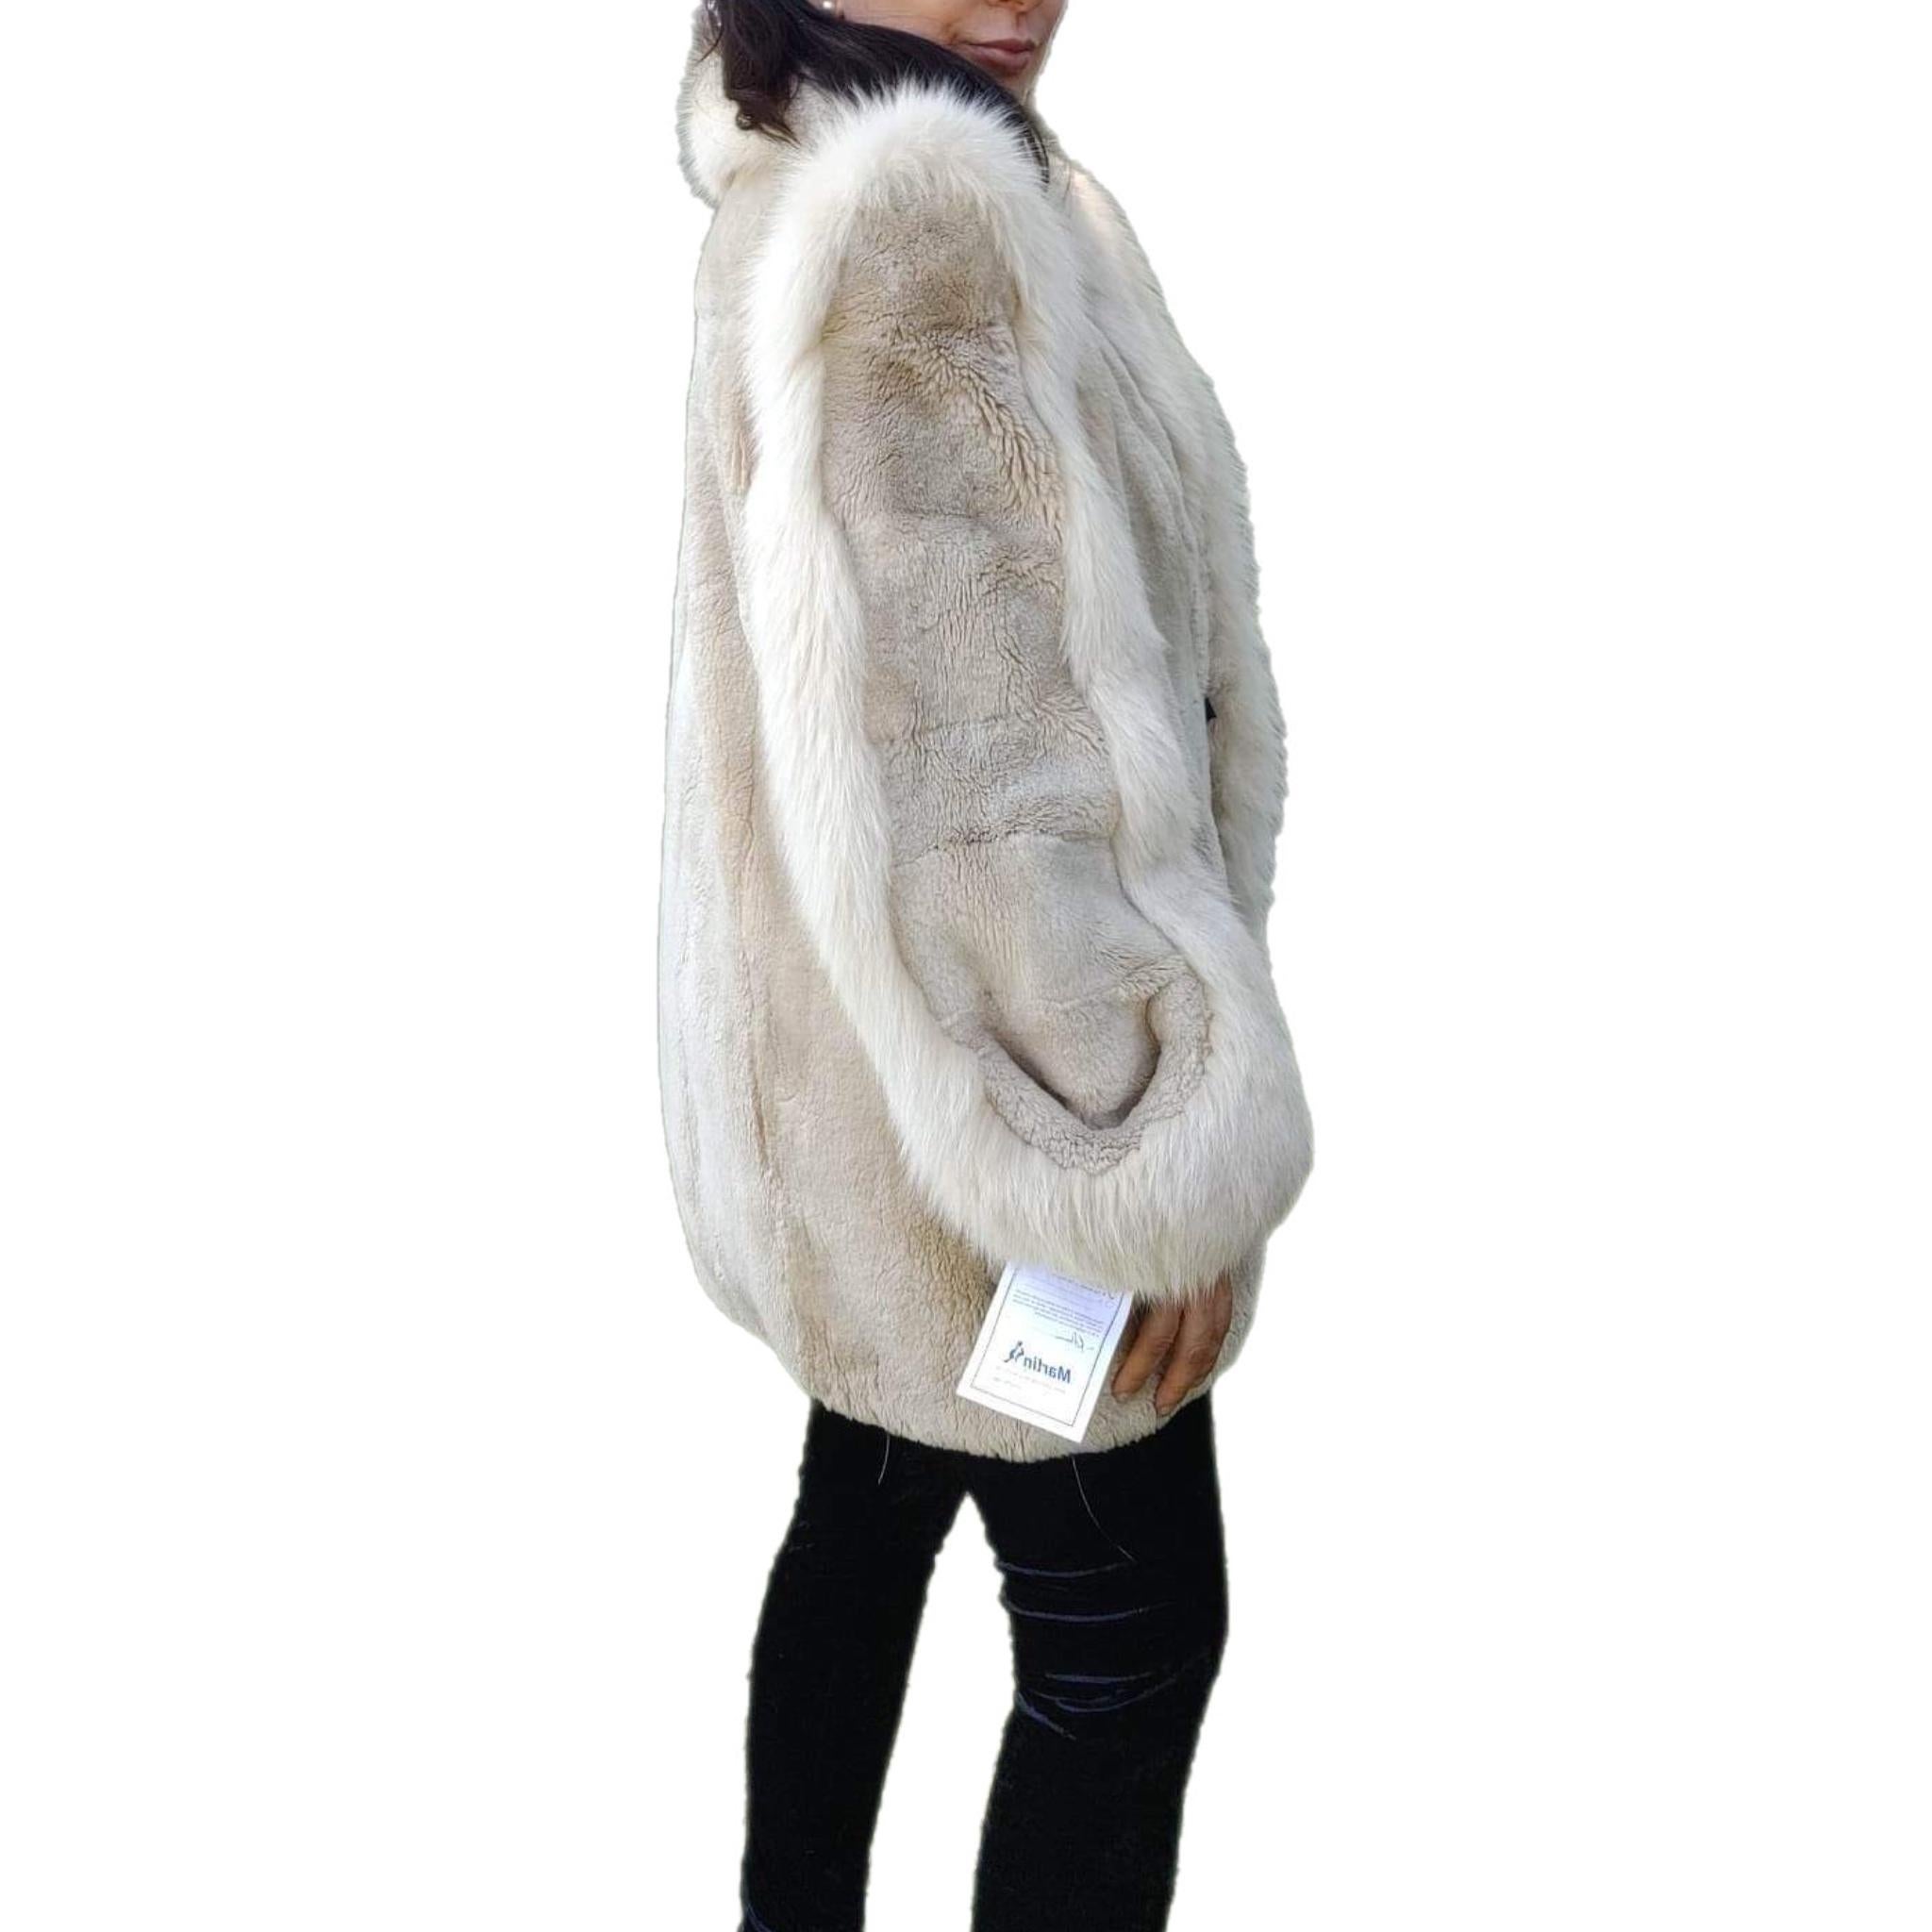 Sheared Beaver Fur Coat with Fur Trim (Size 8-M) For Sale 2